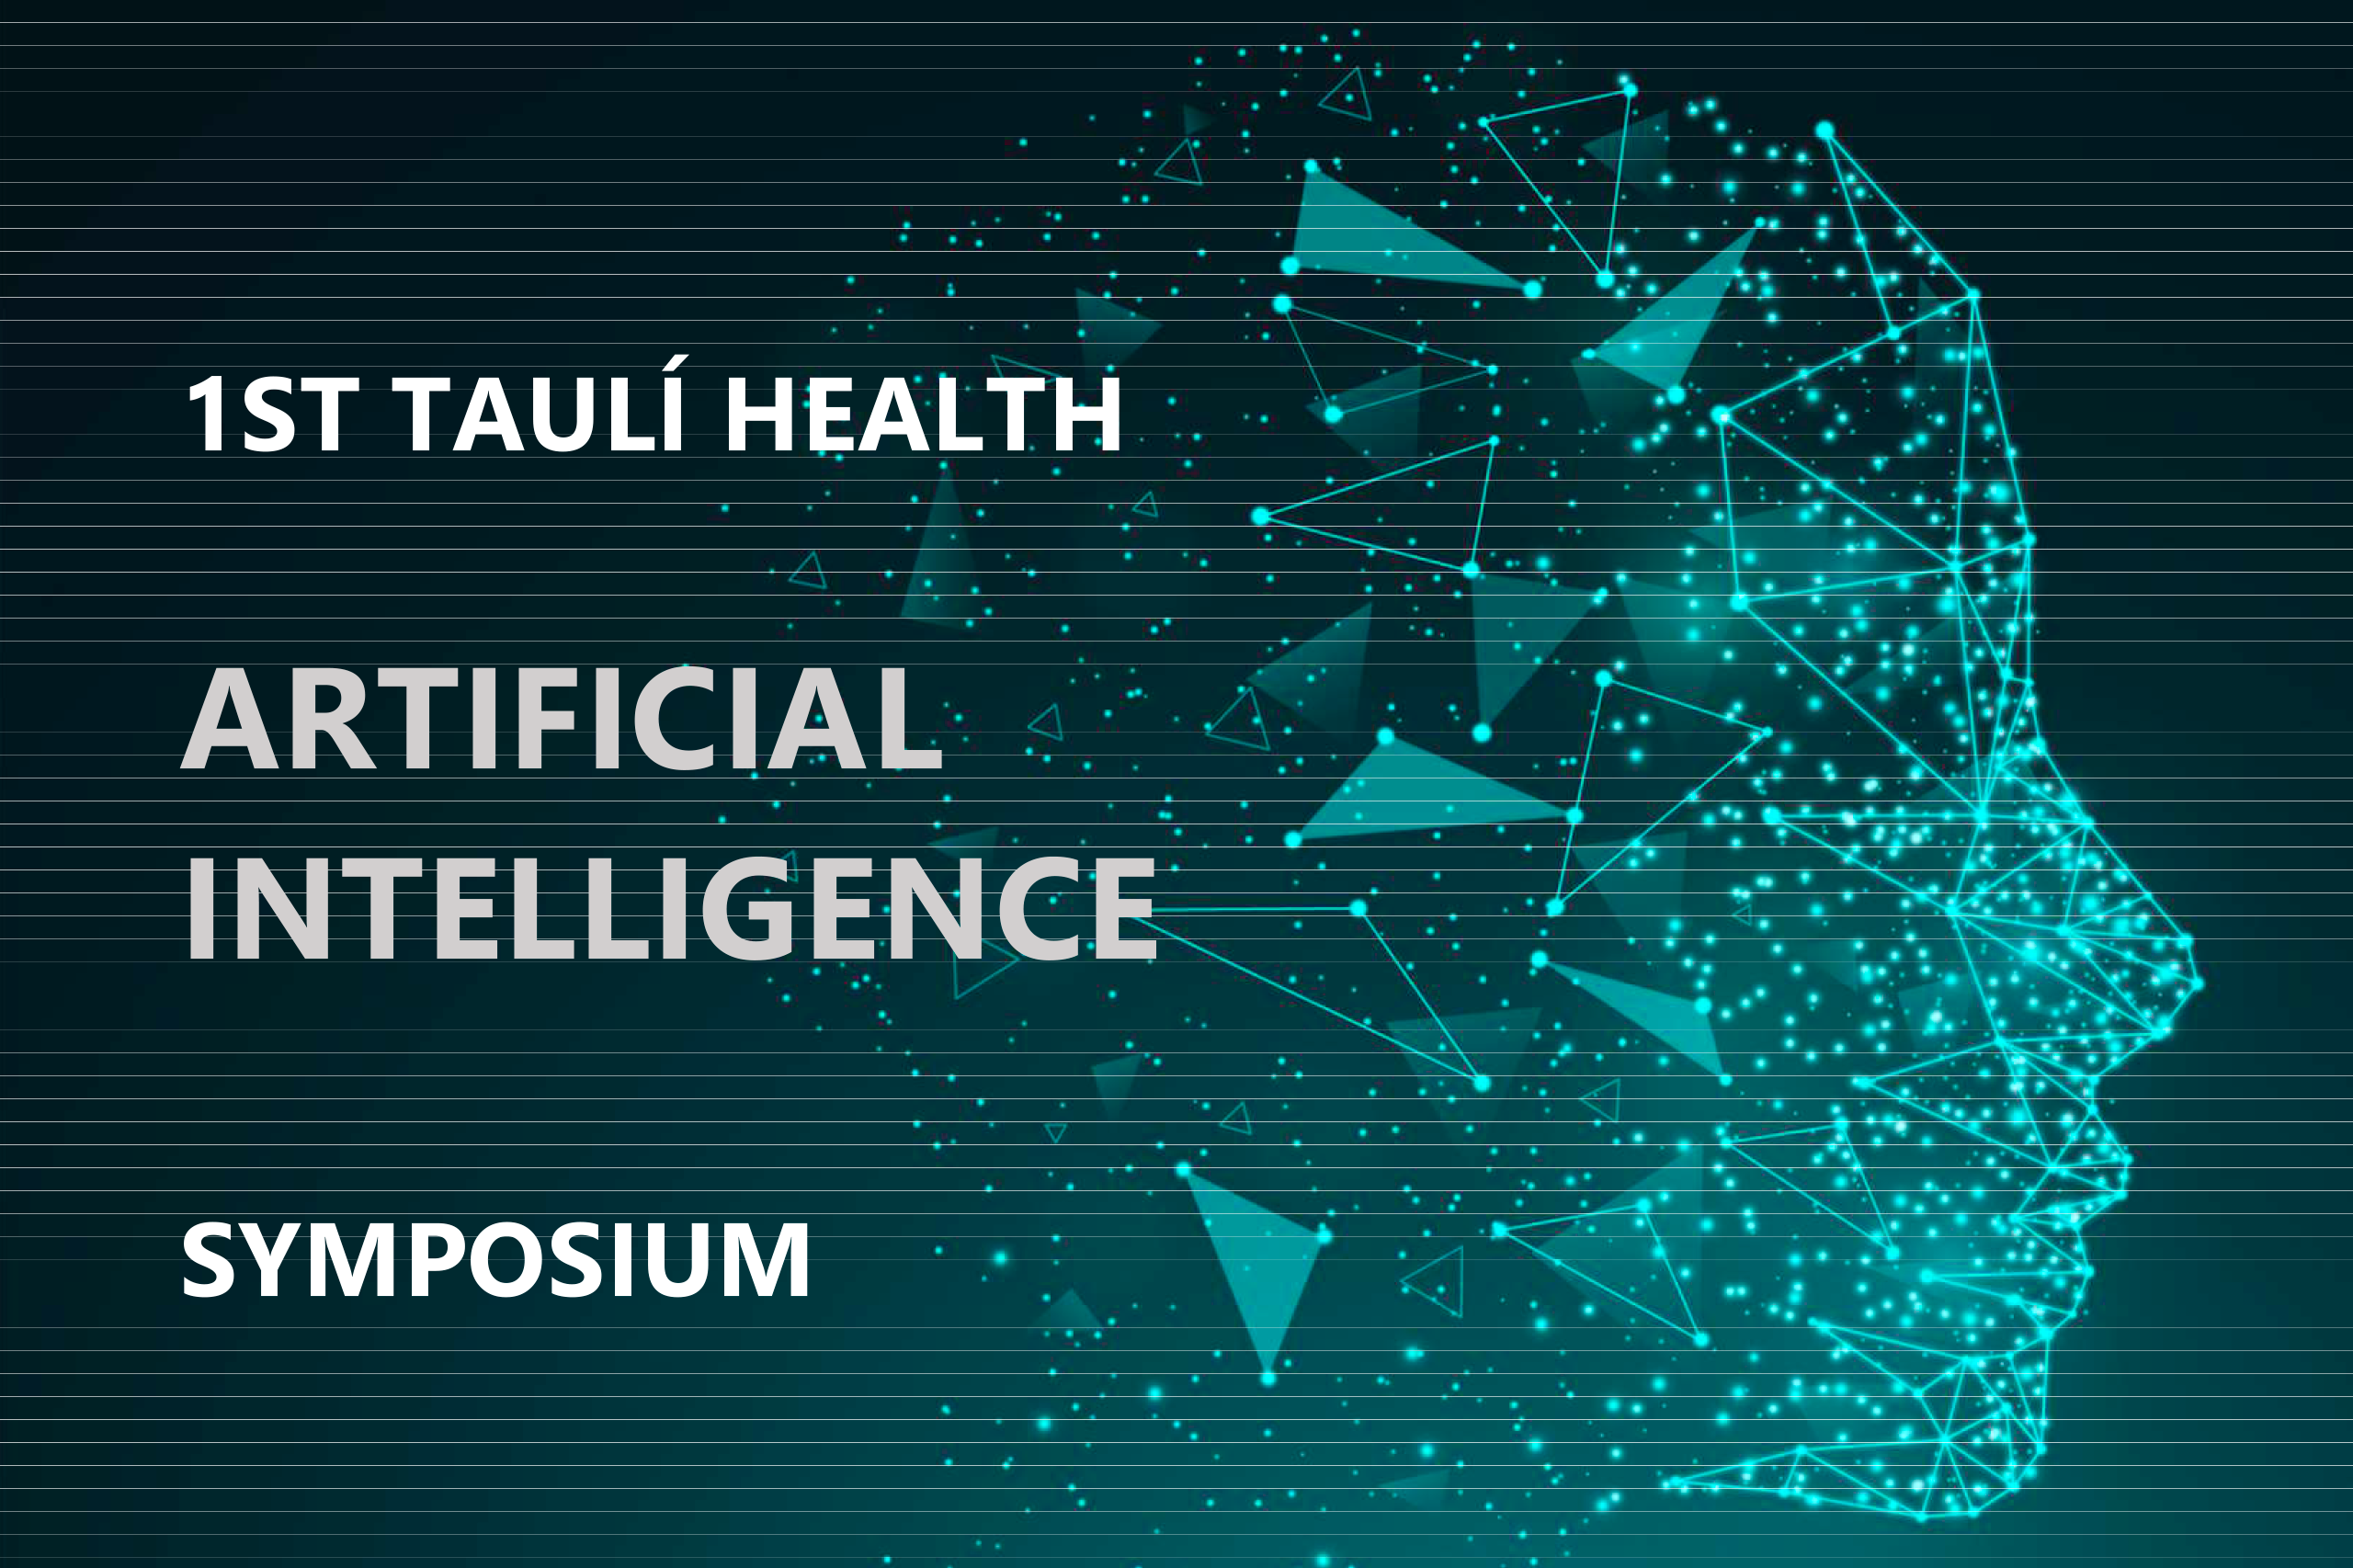 1st Taulí Health Artificial Intelligence Symposium